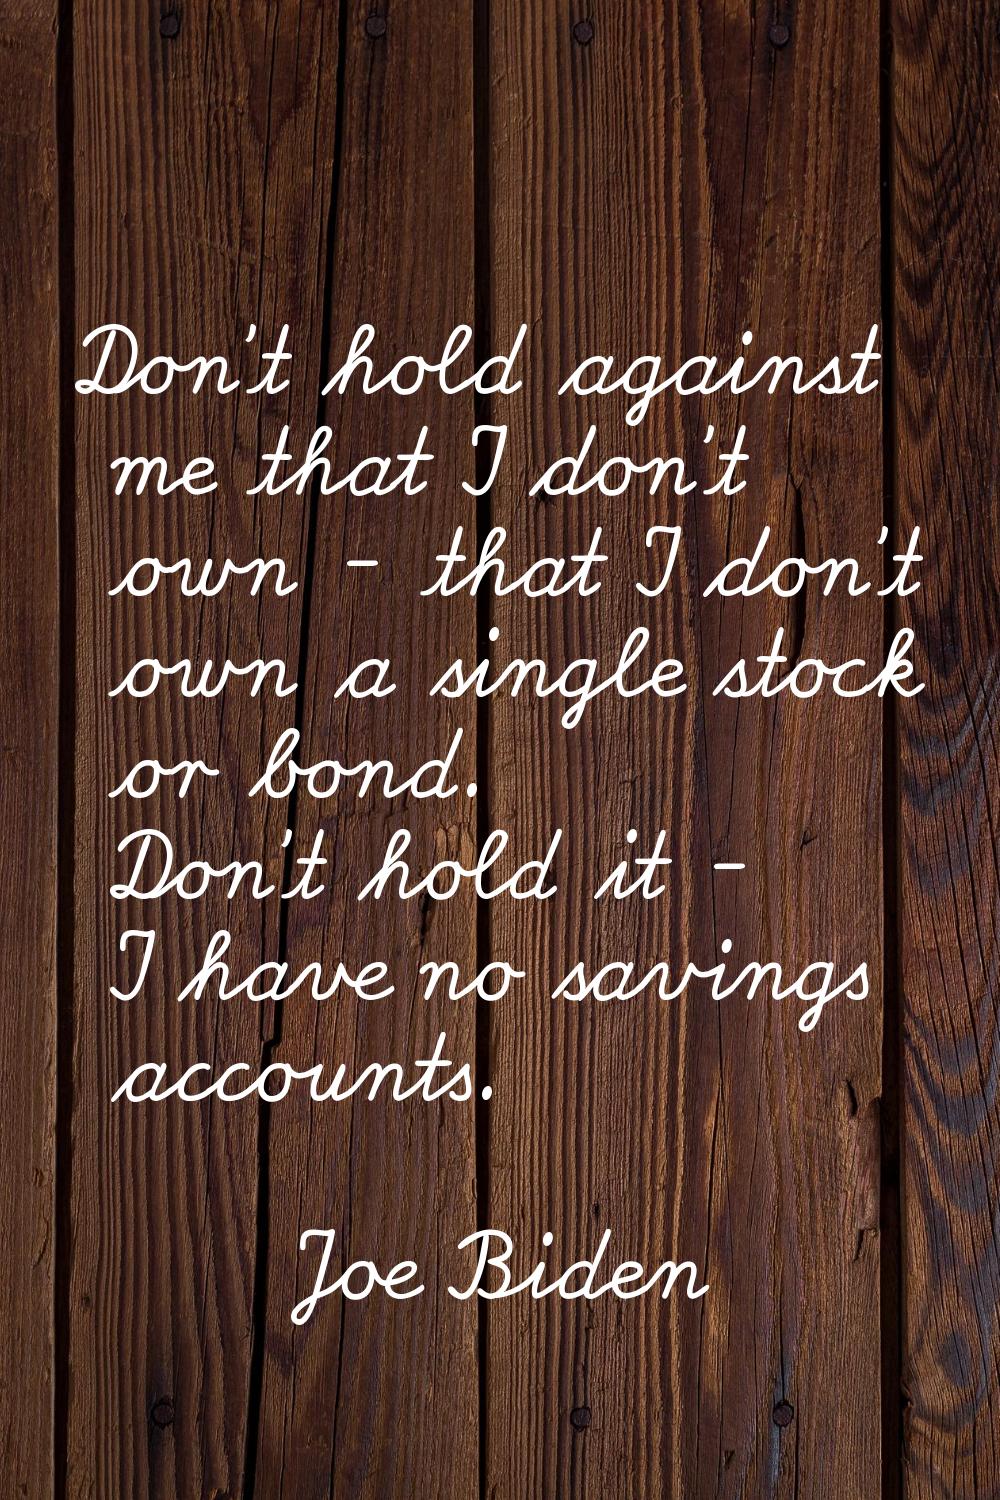 Don't hold against me that I don't own - that I don't own a single stock or bond. Don't hold it - I